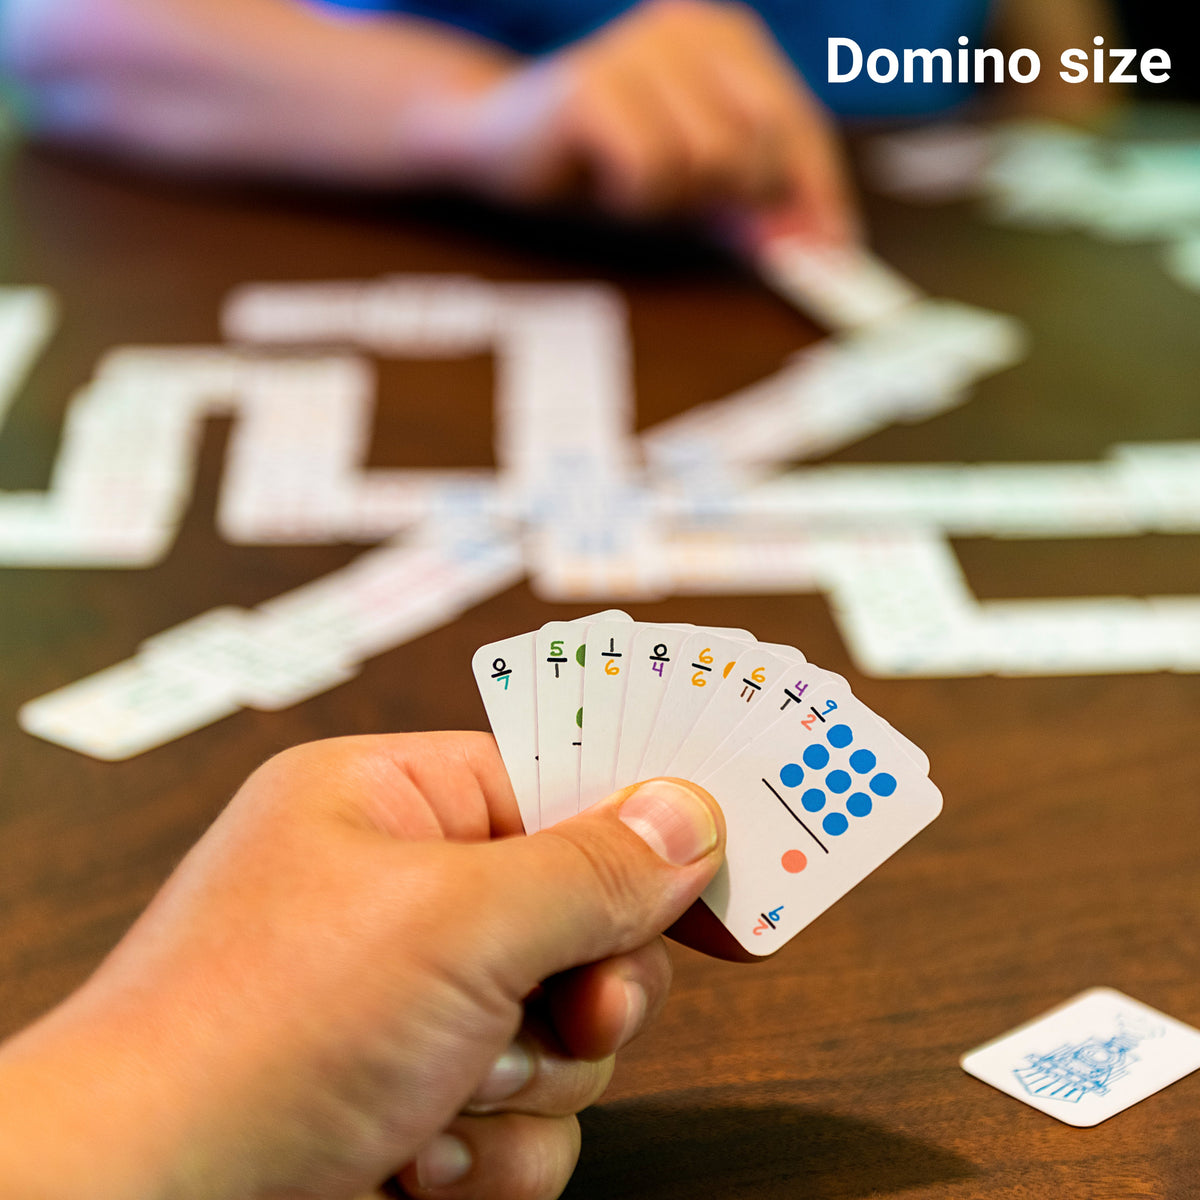 Travel dominoes in the smaller domino size on a table with two people playing. The cards are in one hand fanned out with index corner numbers visible. They are about the quarter of the size of a regular playing card. 